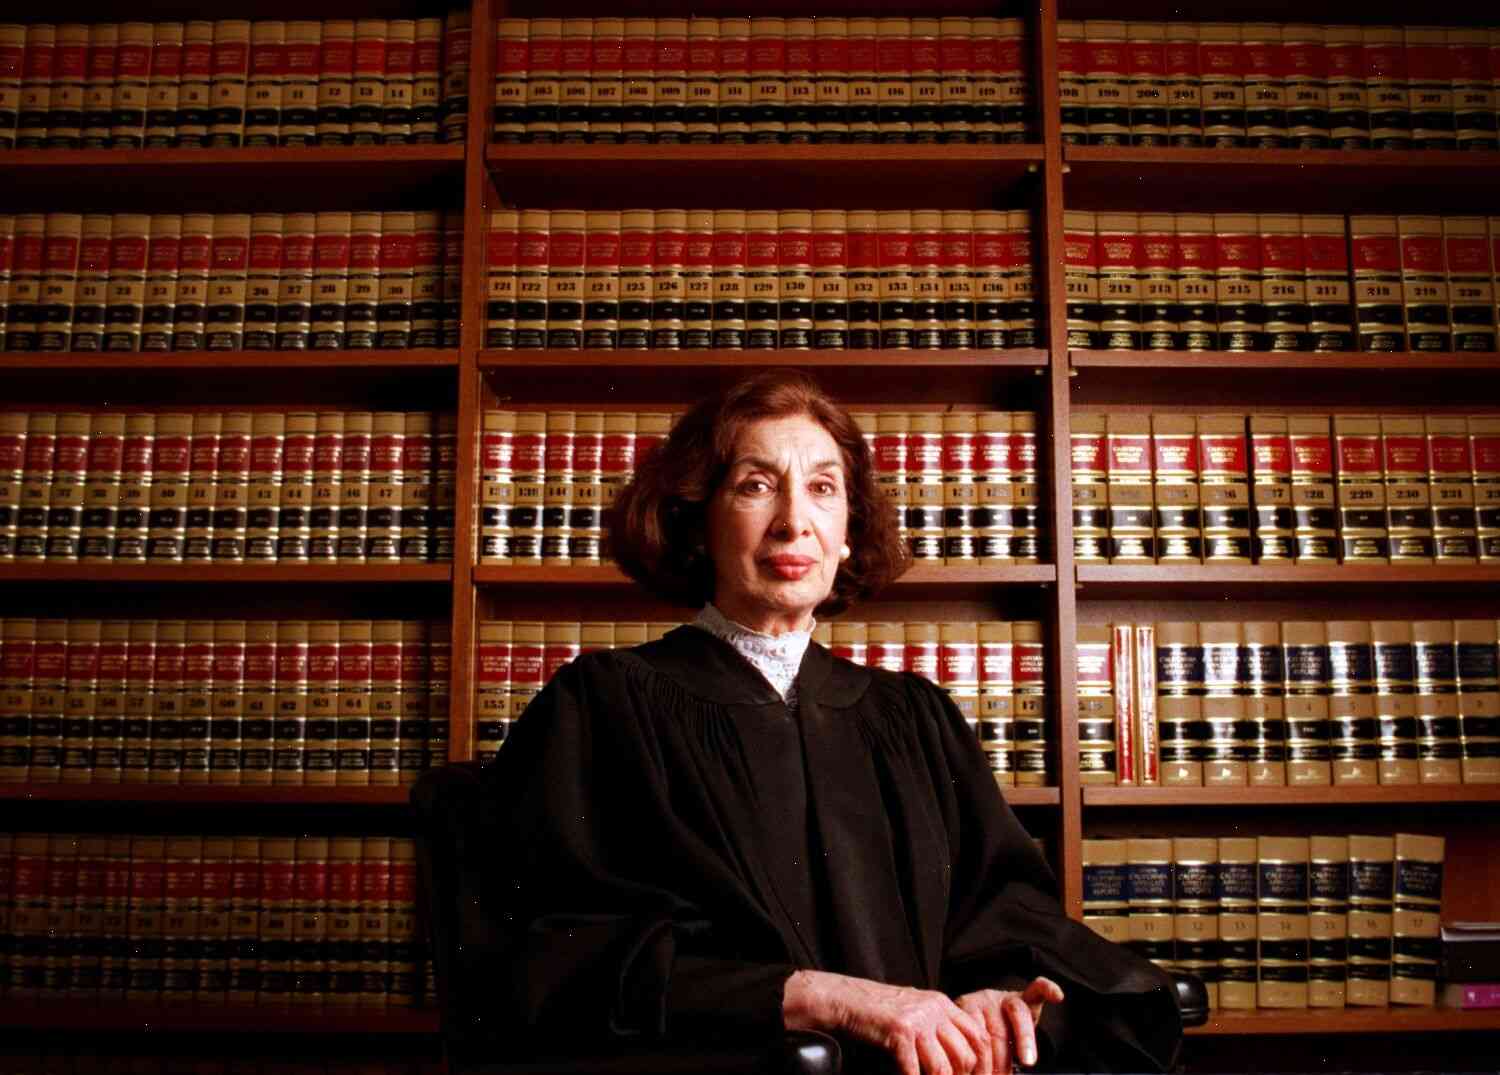 Frances Muoz, the first woman appointed as a trial judge in California, has died